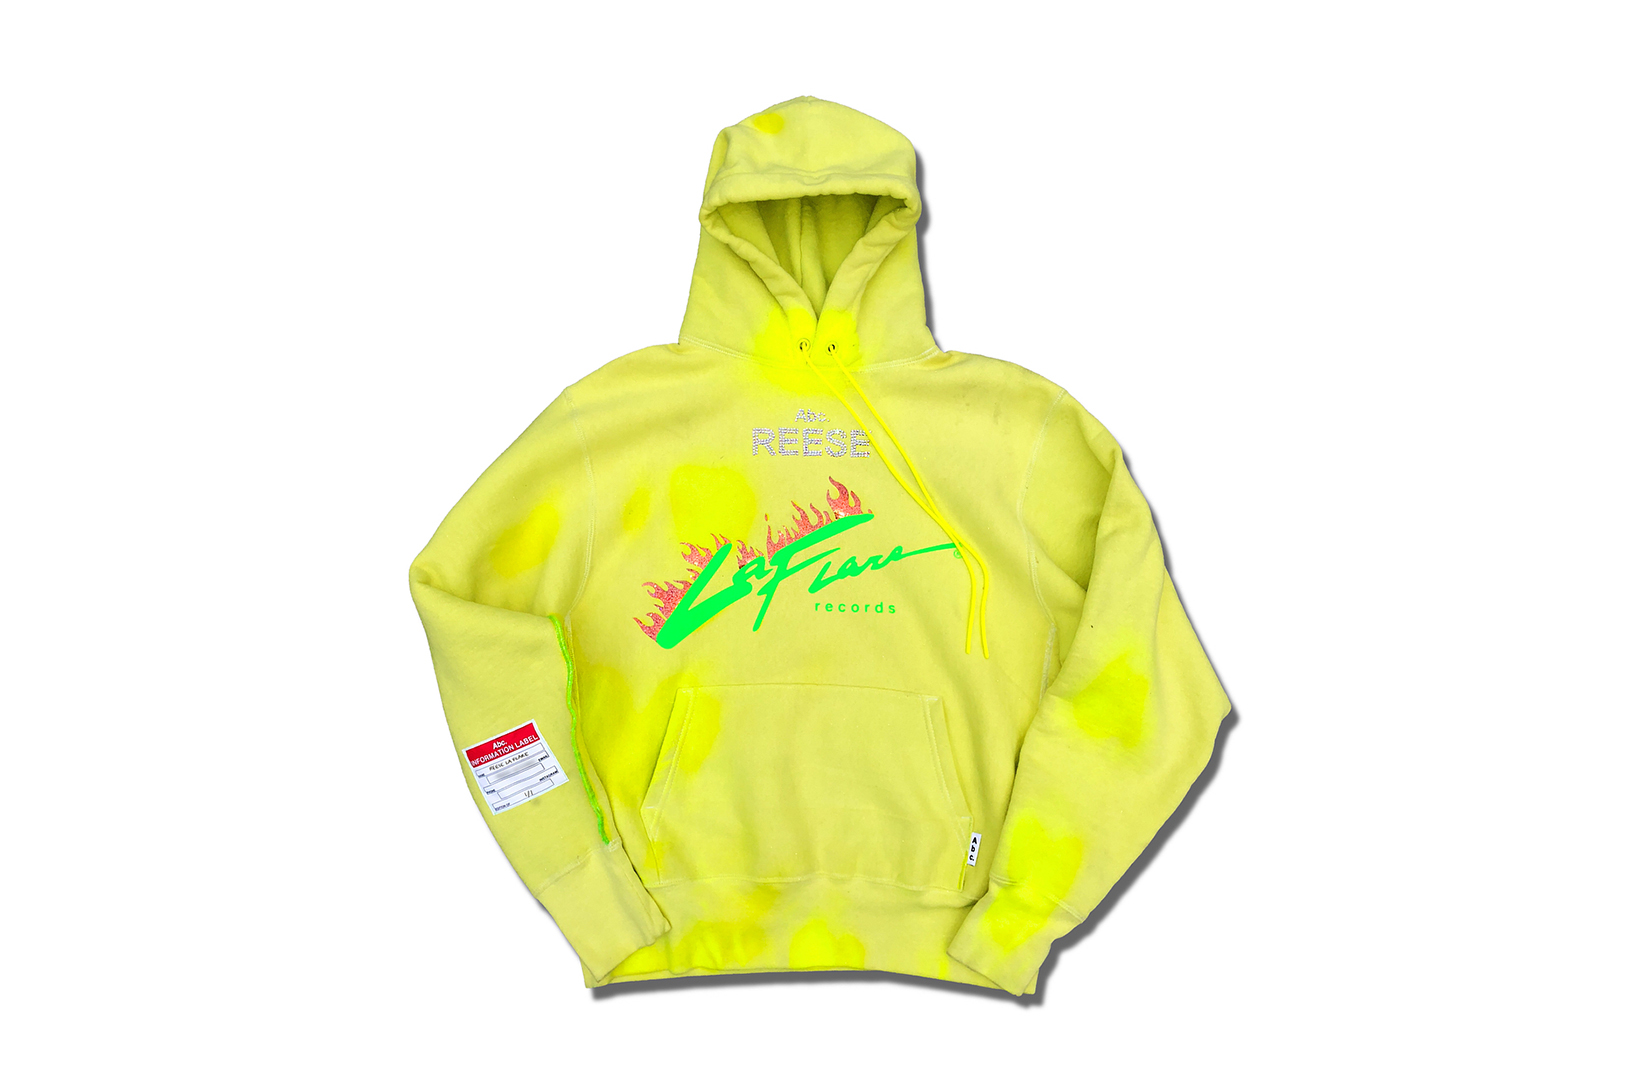 Advisory Board Crystals Custom bespoke Hoodie Reese Records swarovski holographic vinyl spray paint crystal-infused dye paracord pull strings pull tab yellow exclusve